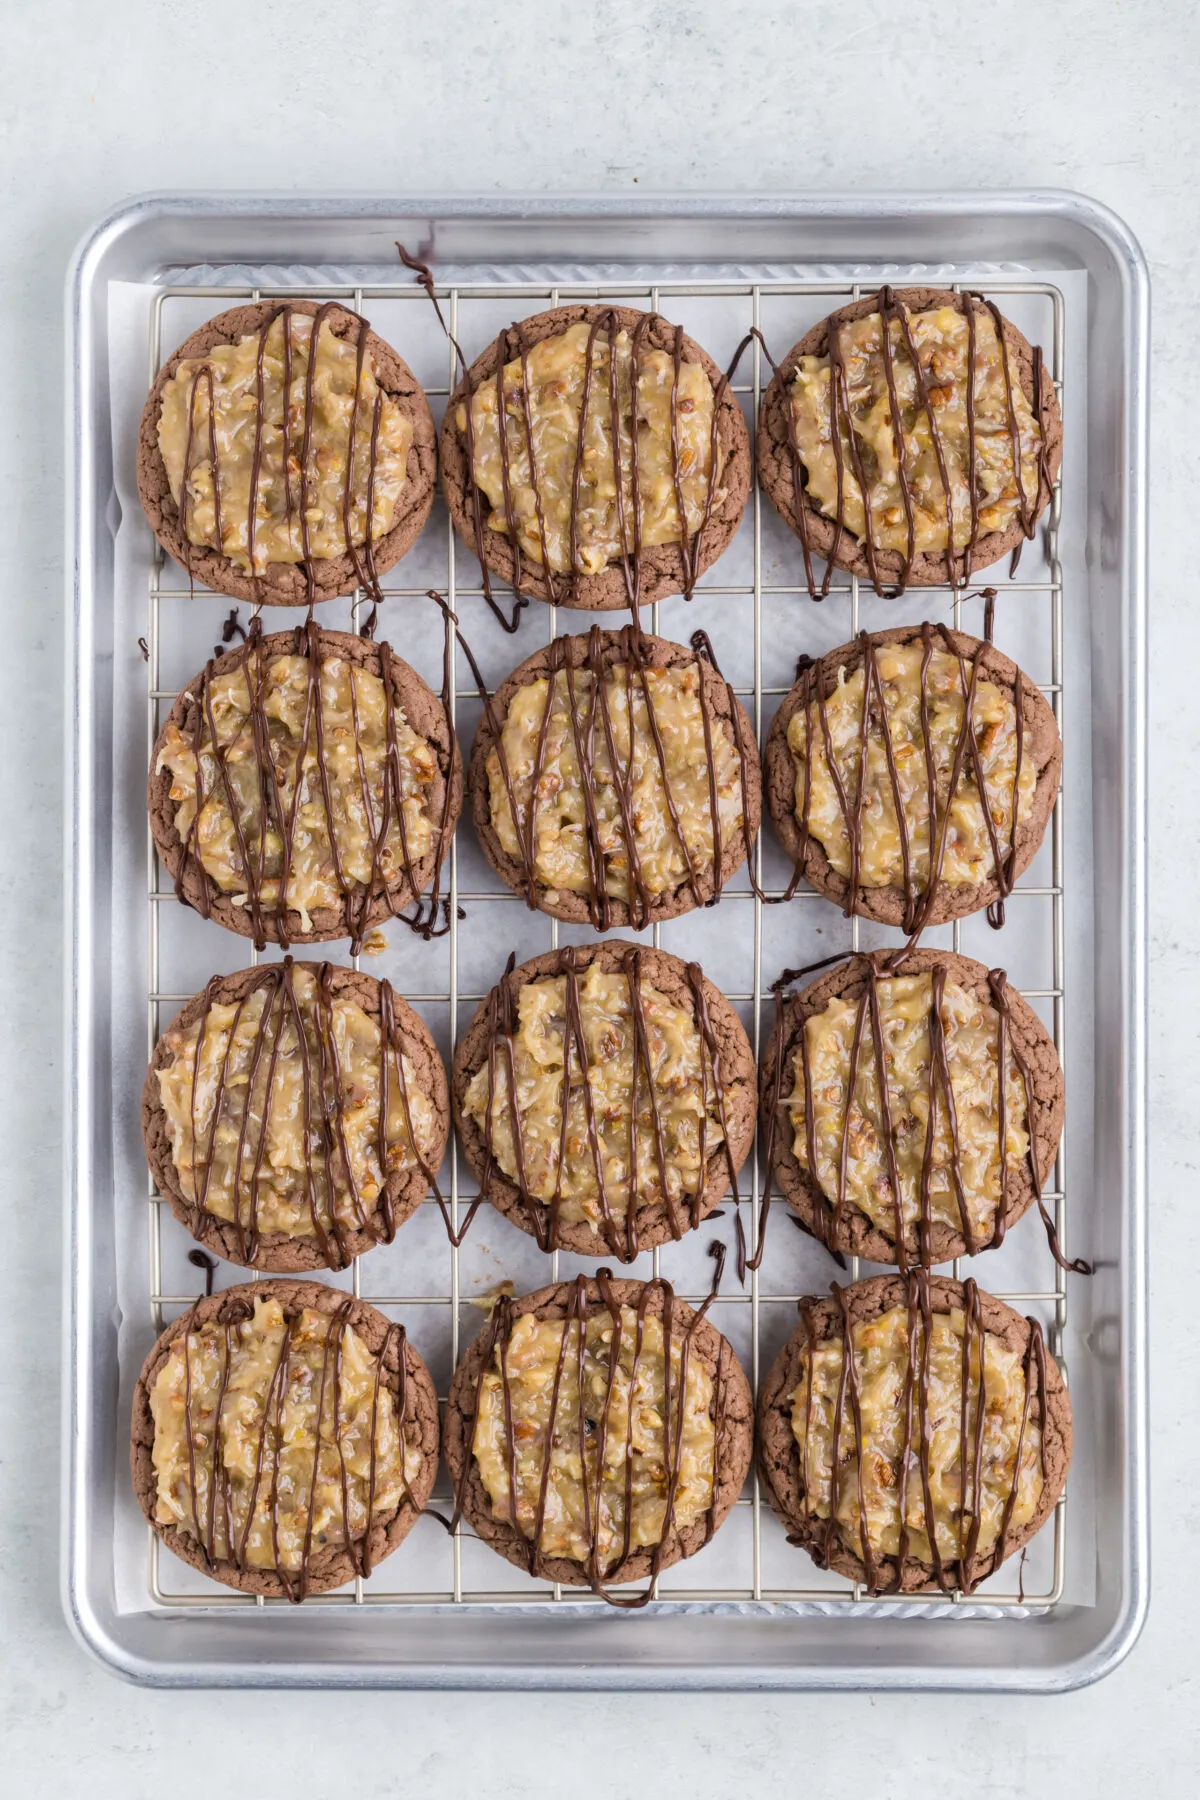 Chocolate drizzled over the cookies.